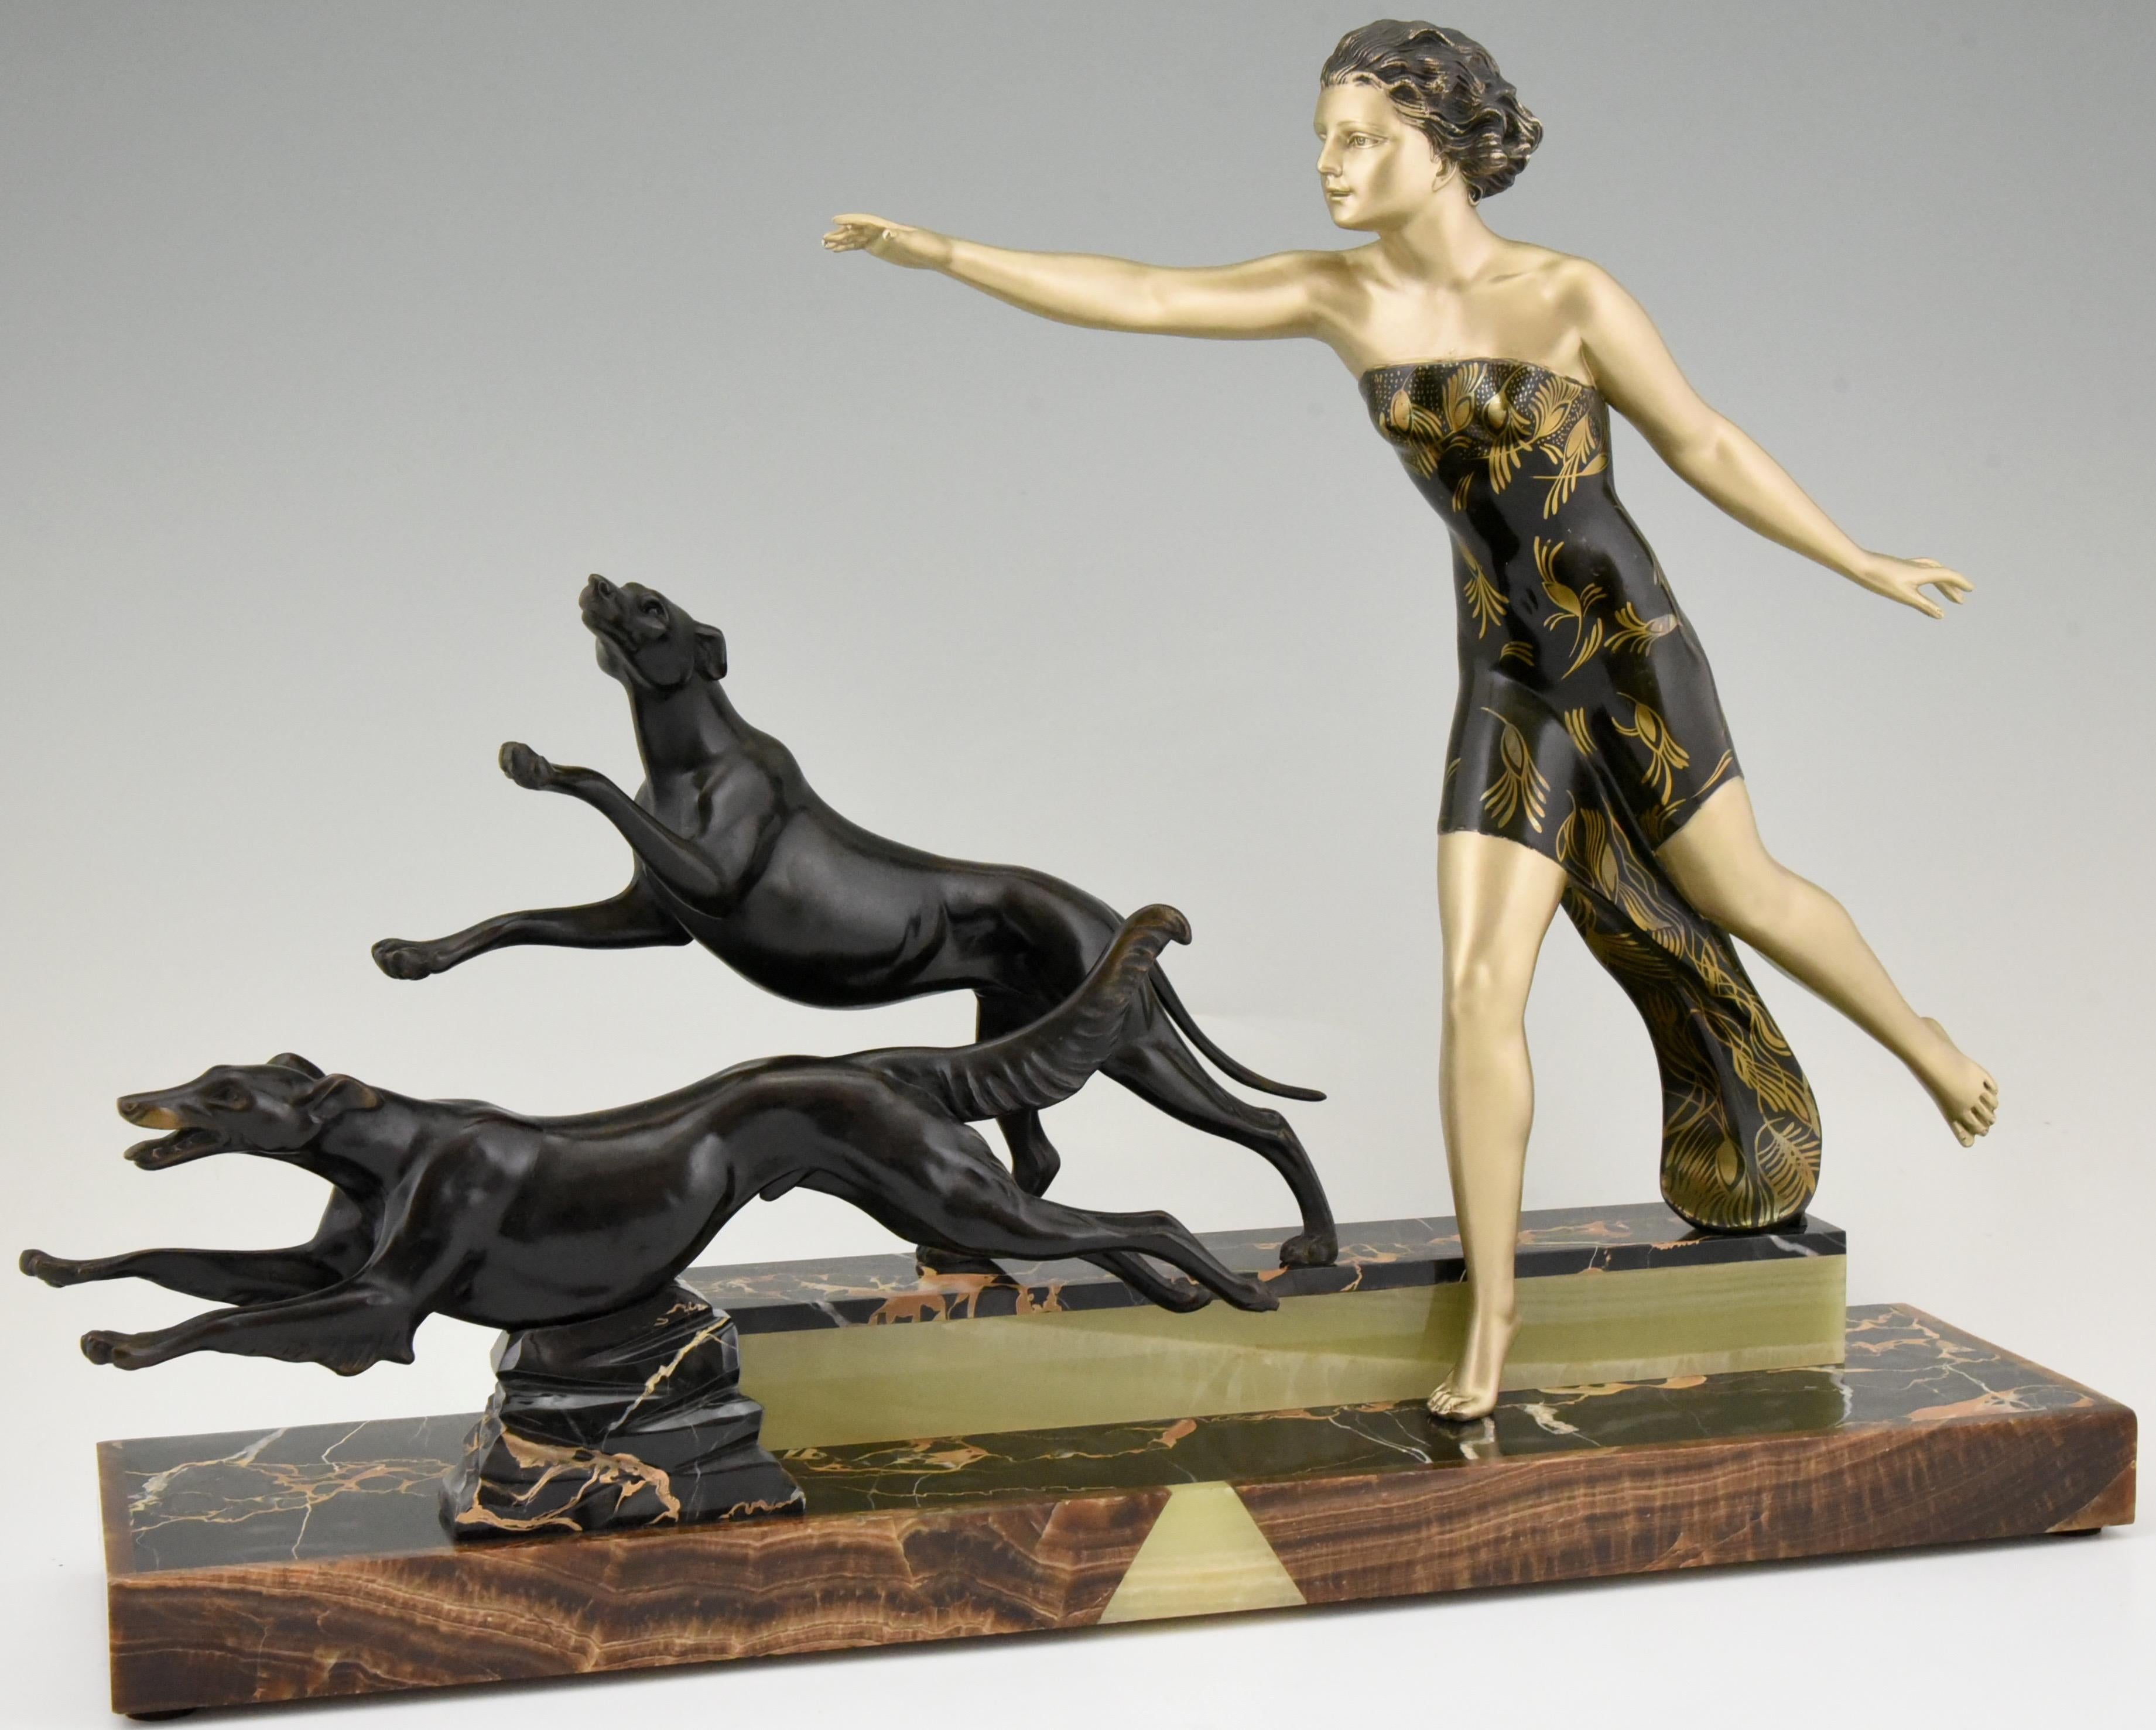 Spectacular Art Deco sculpture lady with dogs, her dress is decorated with flowers. The piece signed by Uriano, an Italian artist who worked in France.
The sculpture is mounted on a fine onyx and marble base, circa 1930.